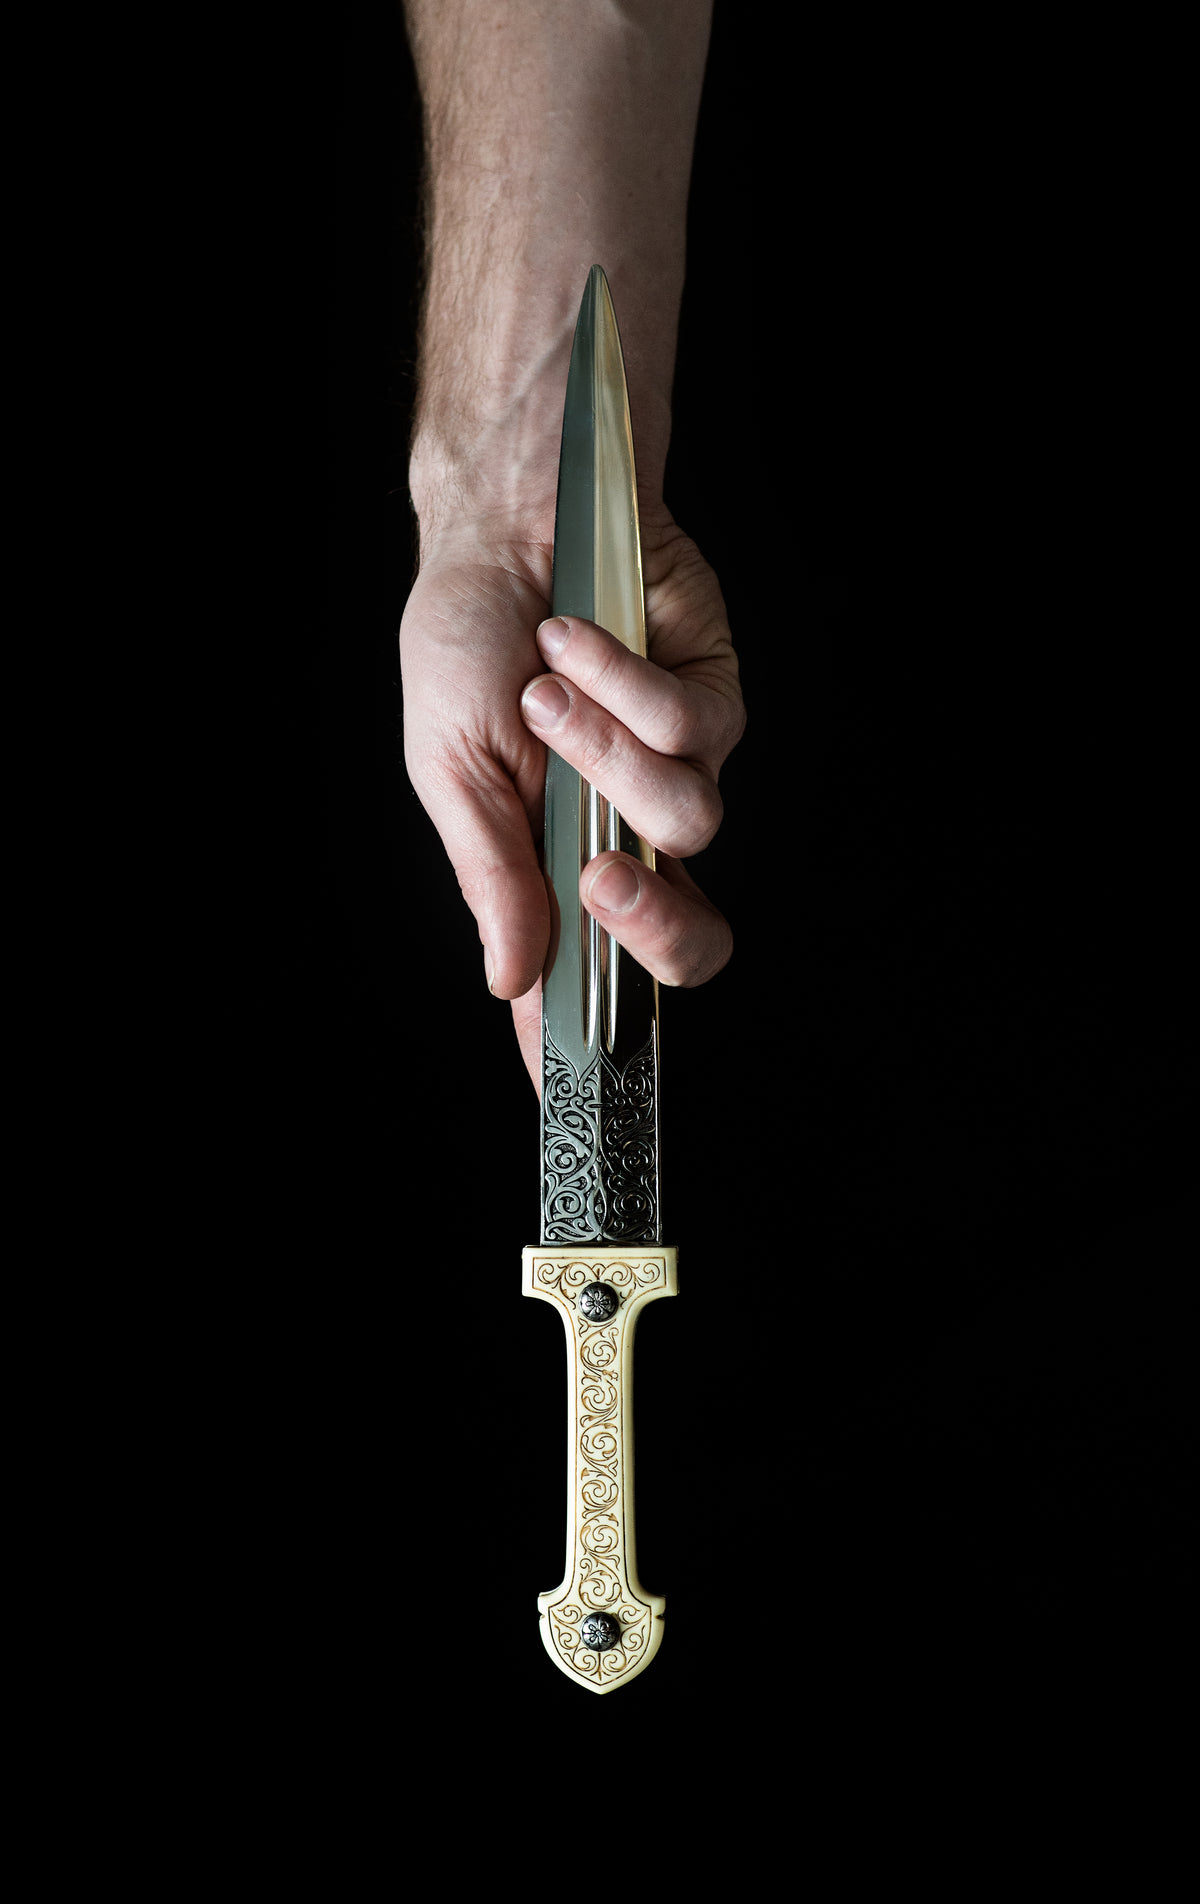 a hand clasps an ornate dagger by the blade